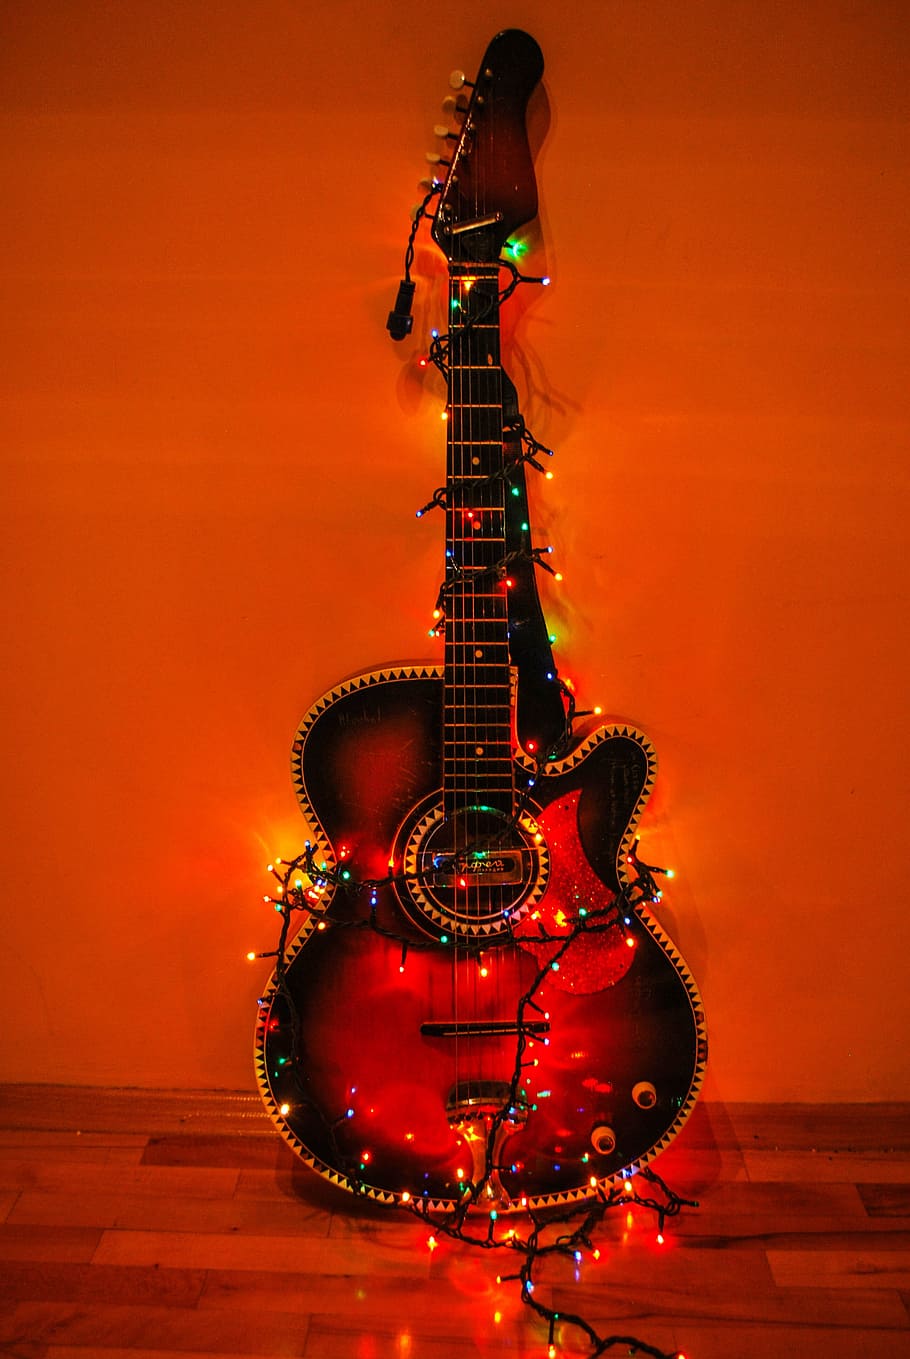 HD wallpaper: acoustic guitar surrounded with string lights against the wall